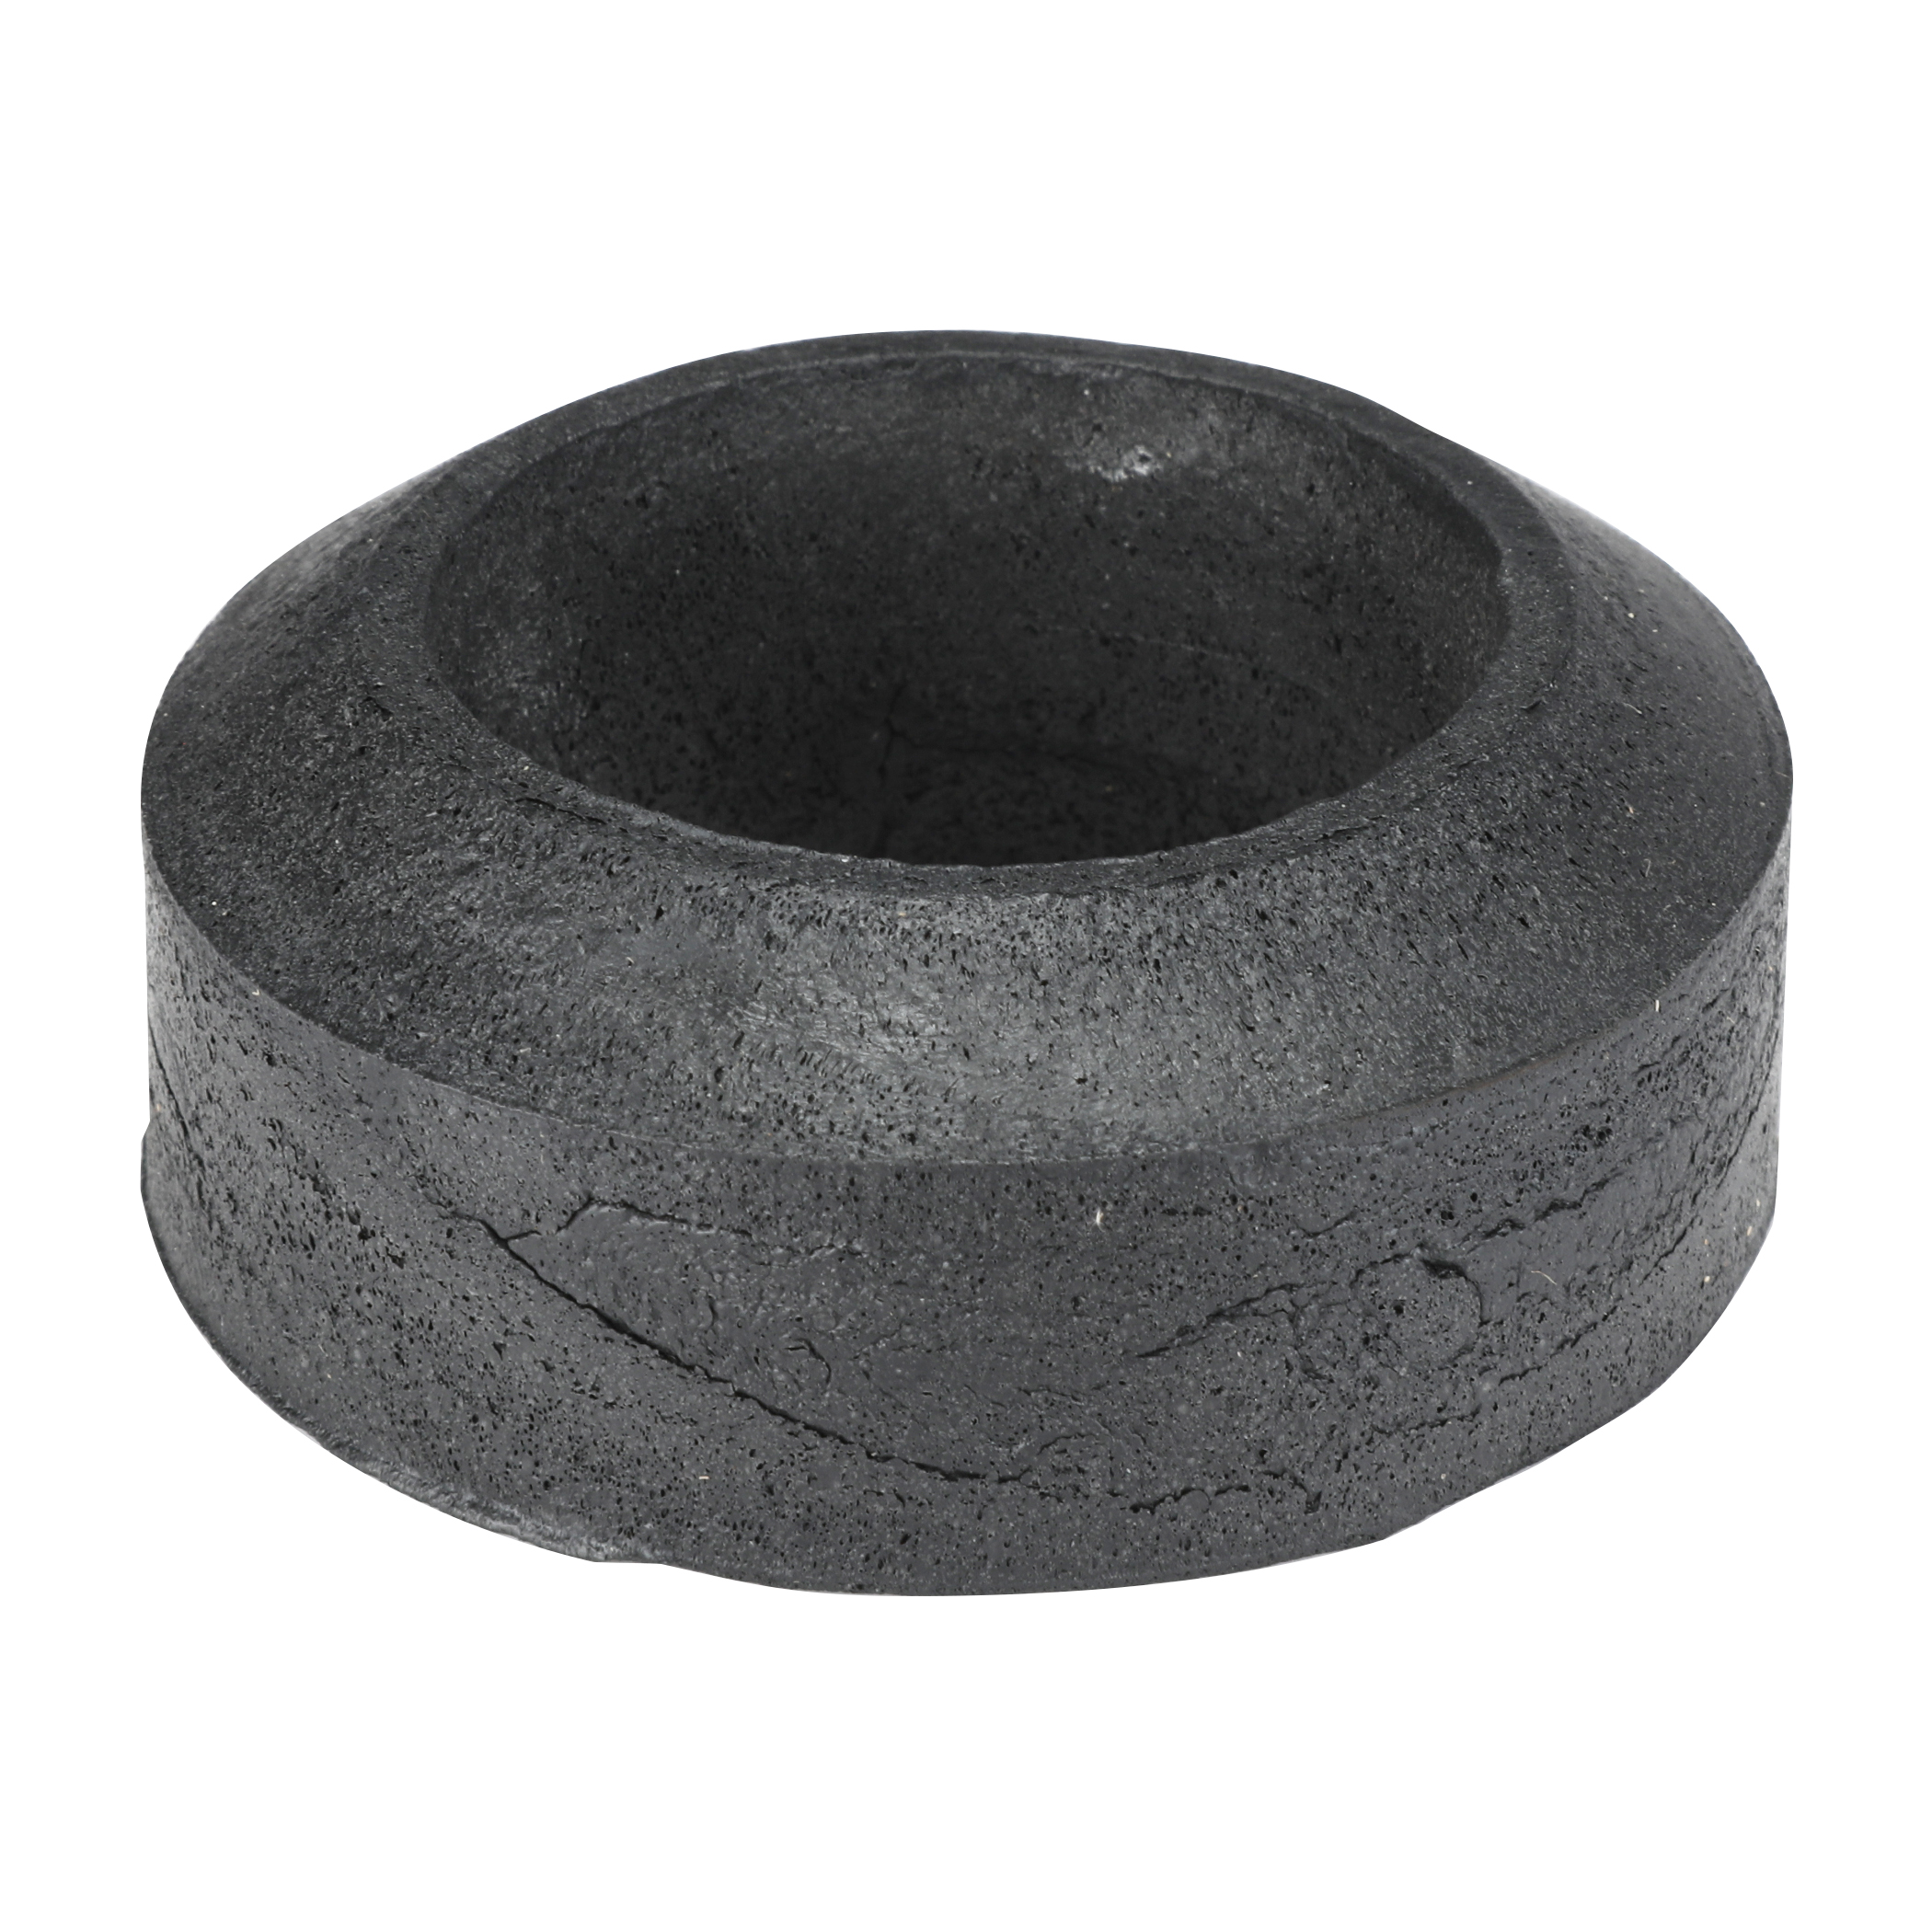 CAI Approved Rubber Spud Gasket Black for Use with Urinal